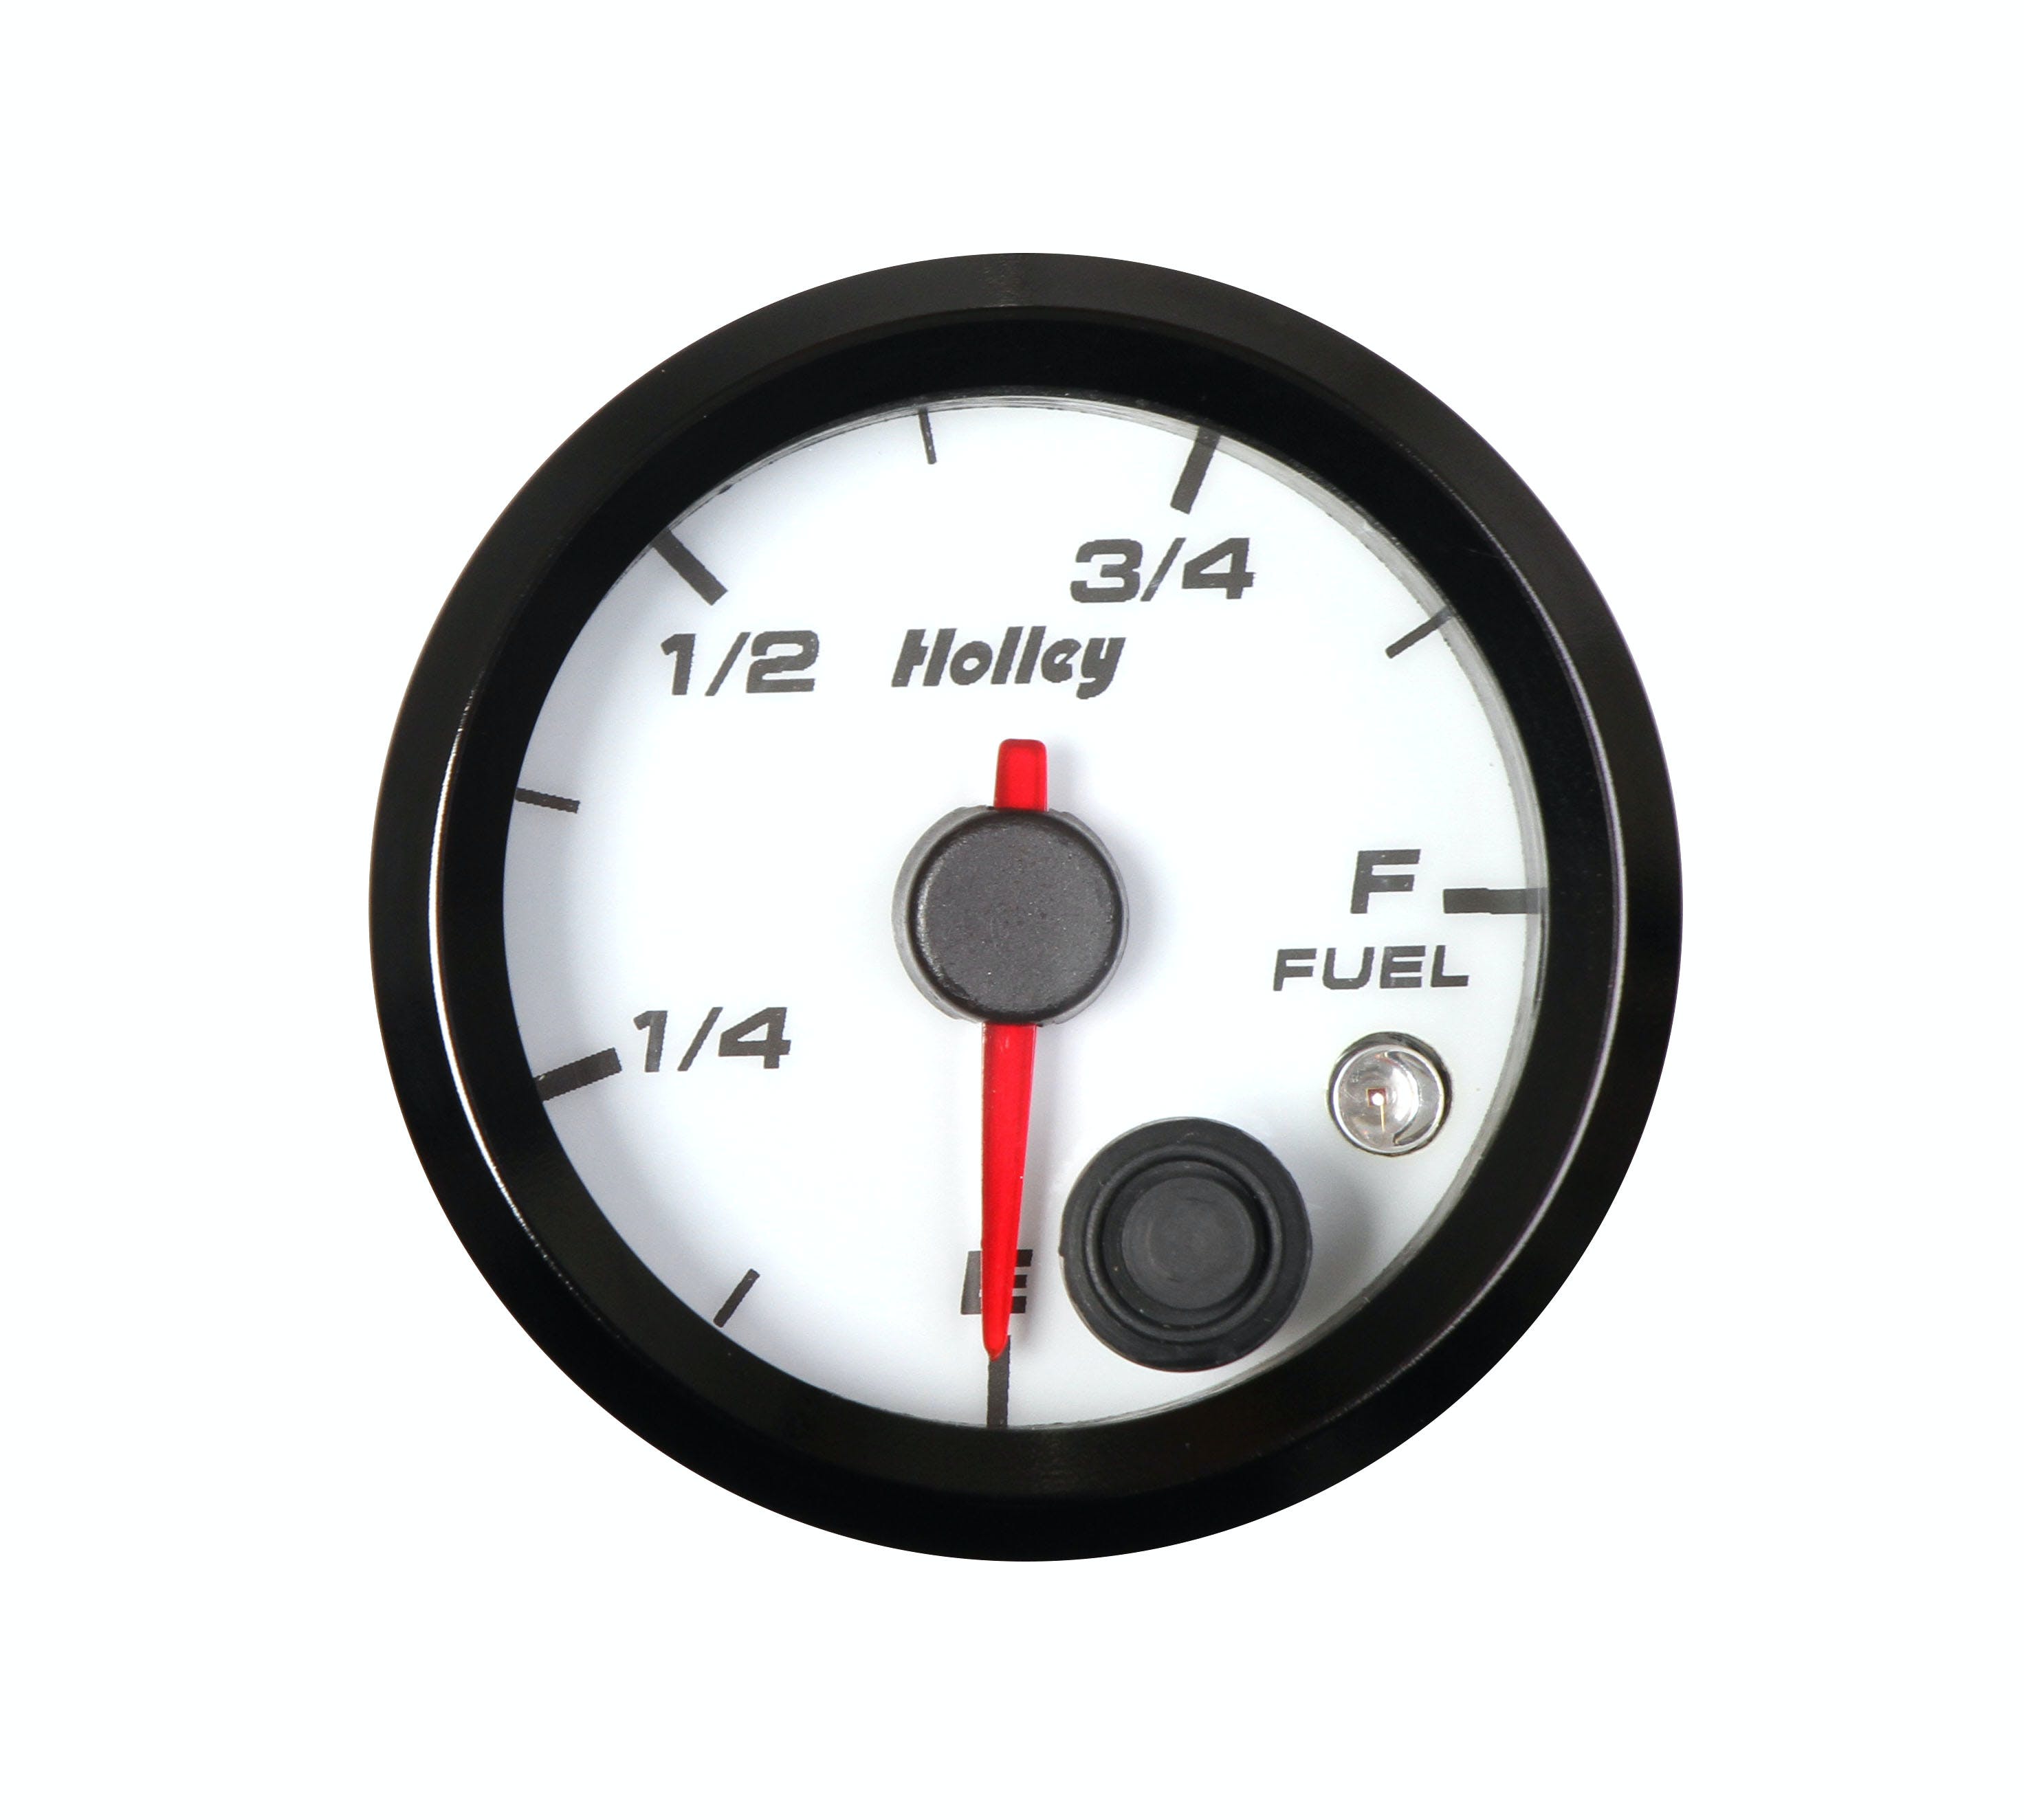 Holley 26-614W 2-1/16 HOLLEY FUEL LEVEL GAUGE-WHT